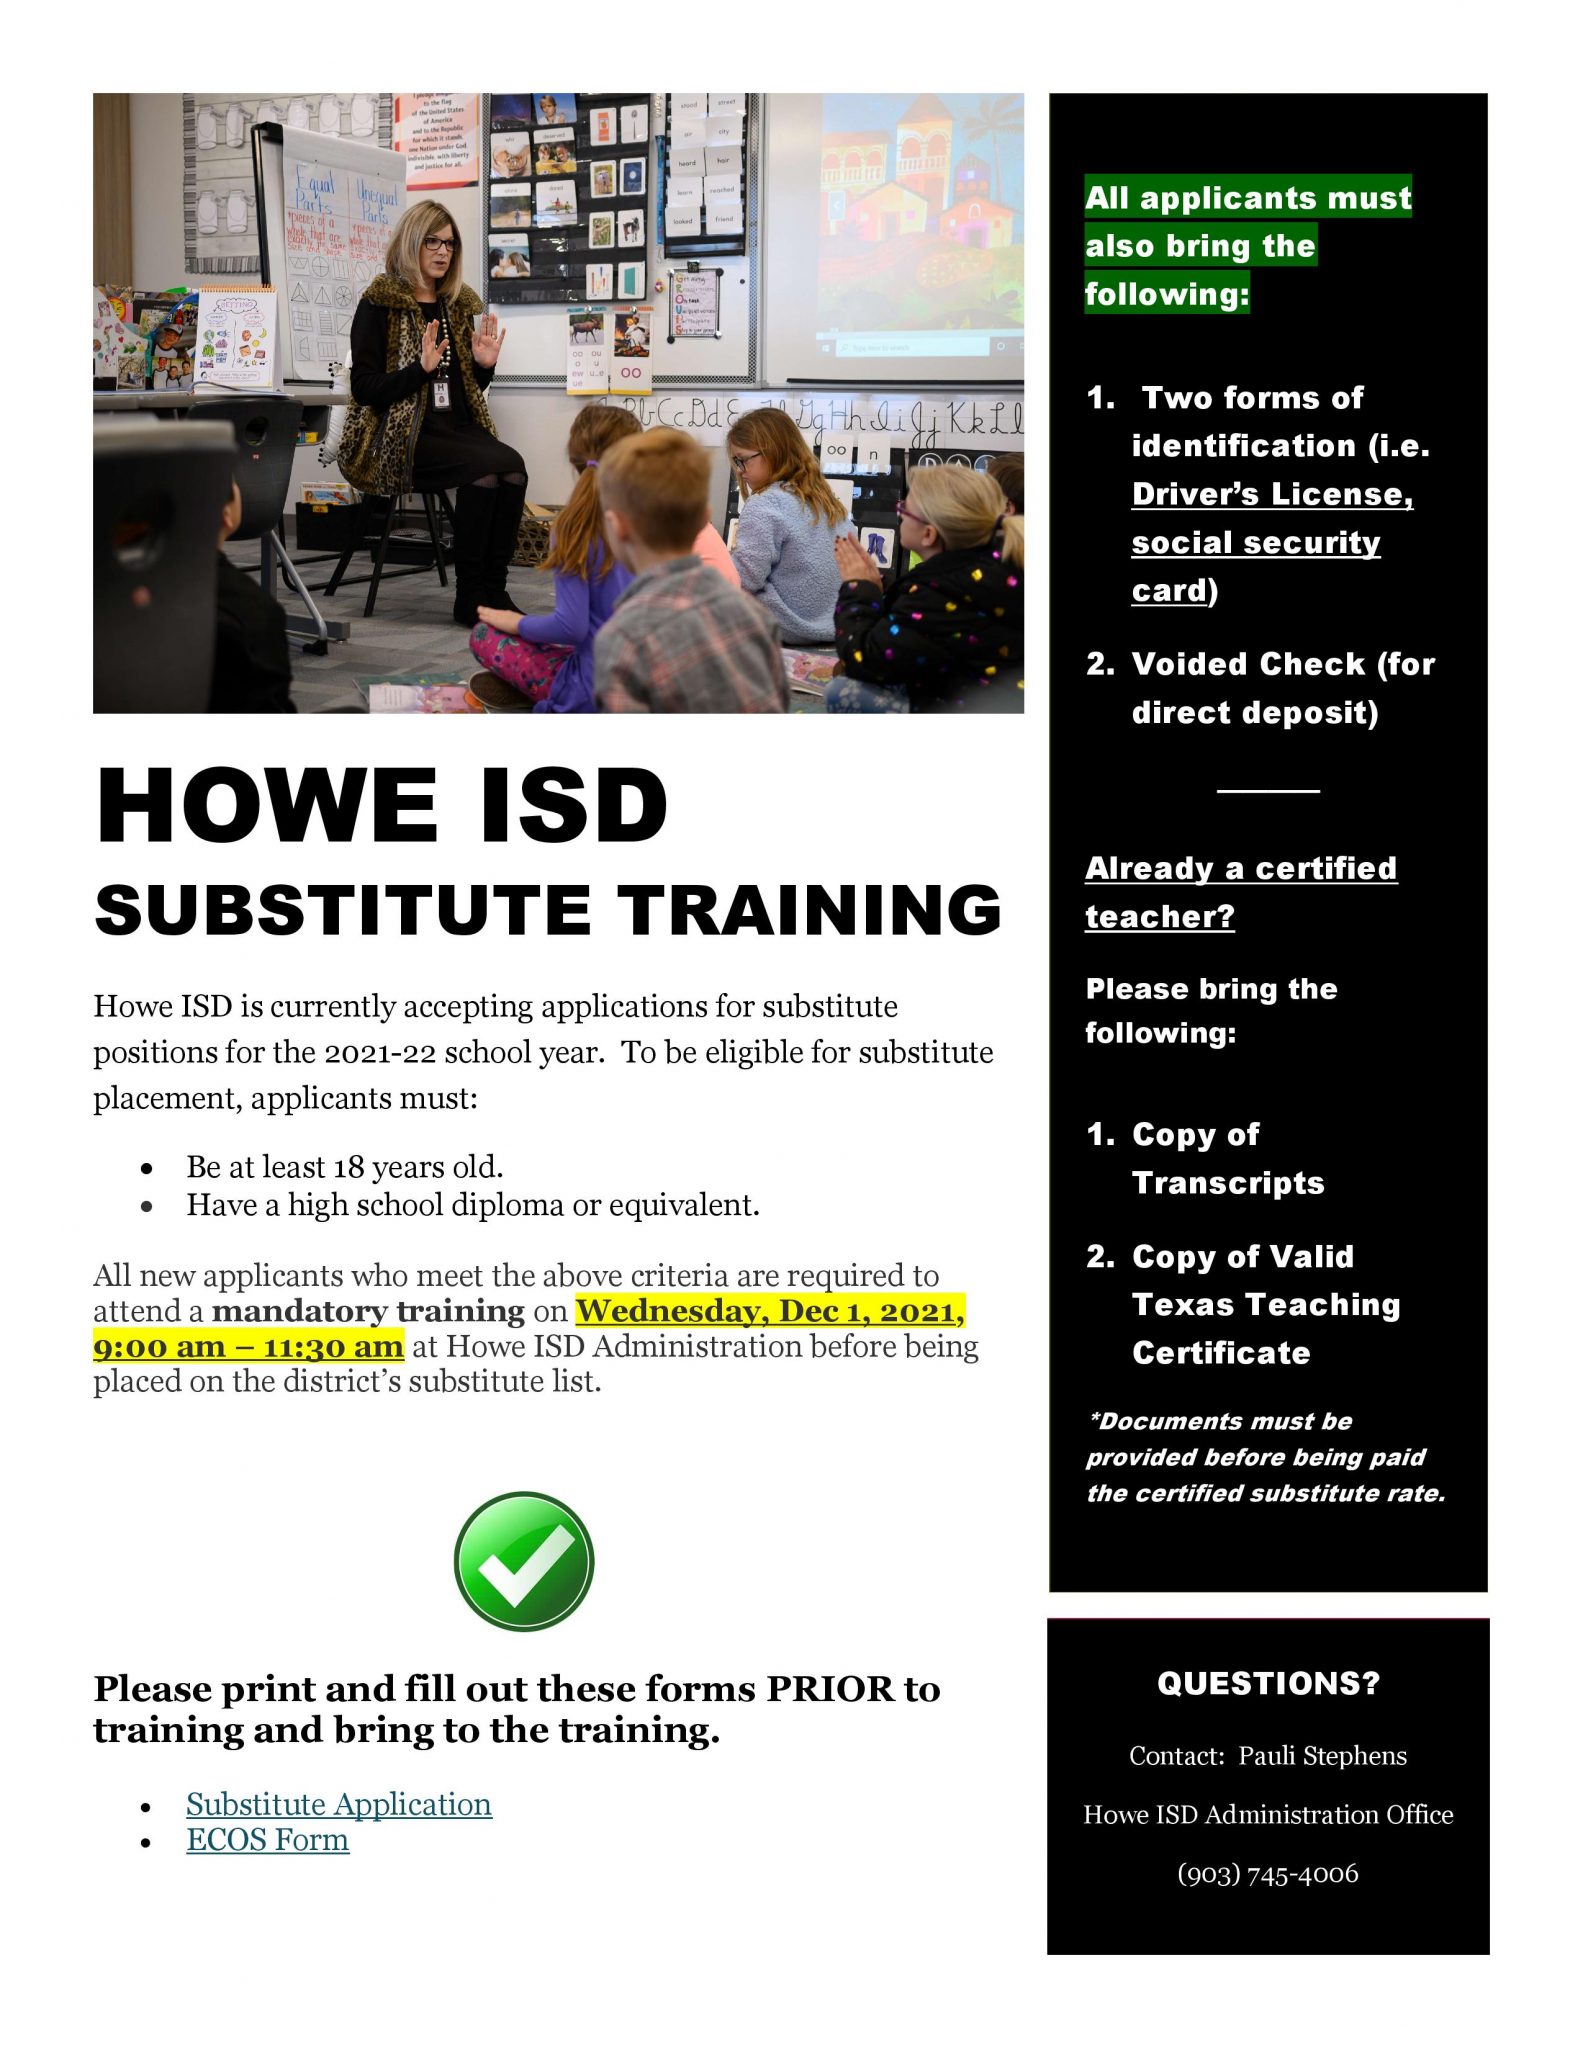 Howe ISD is currently accepting applications for substitute positions